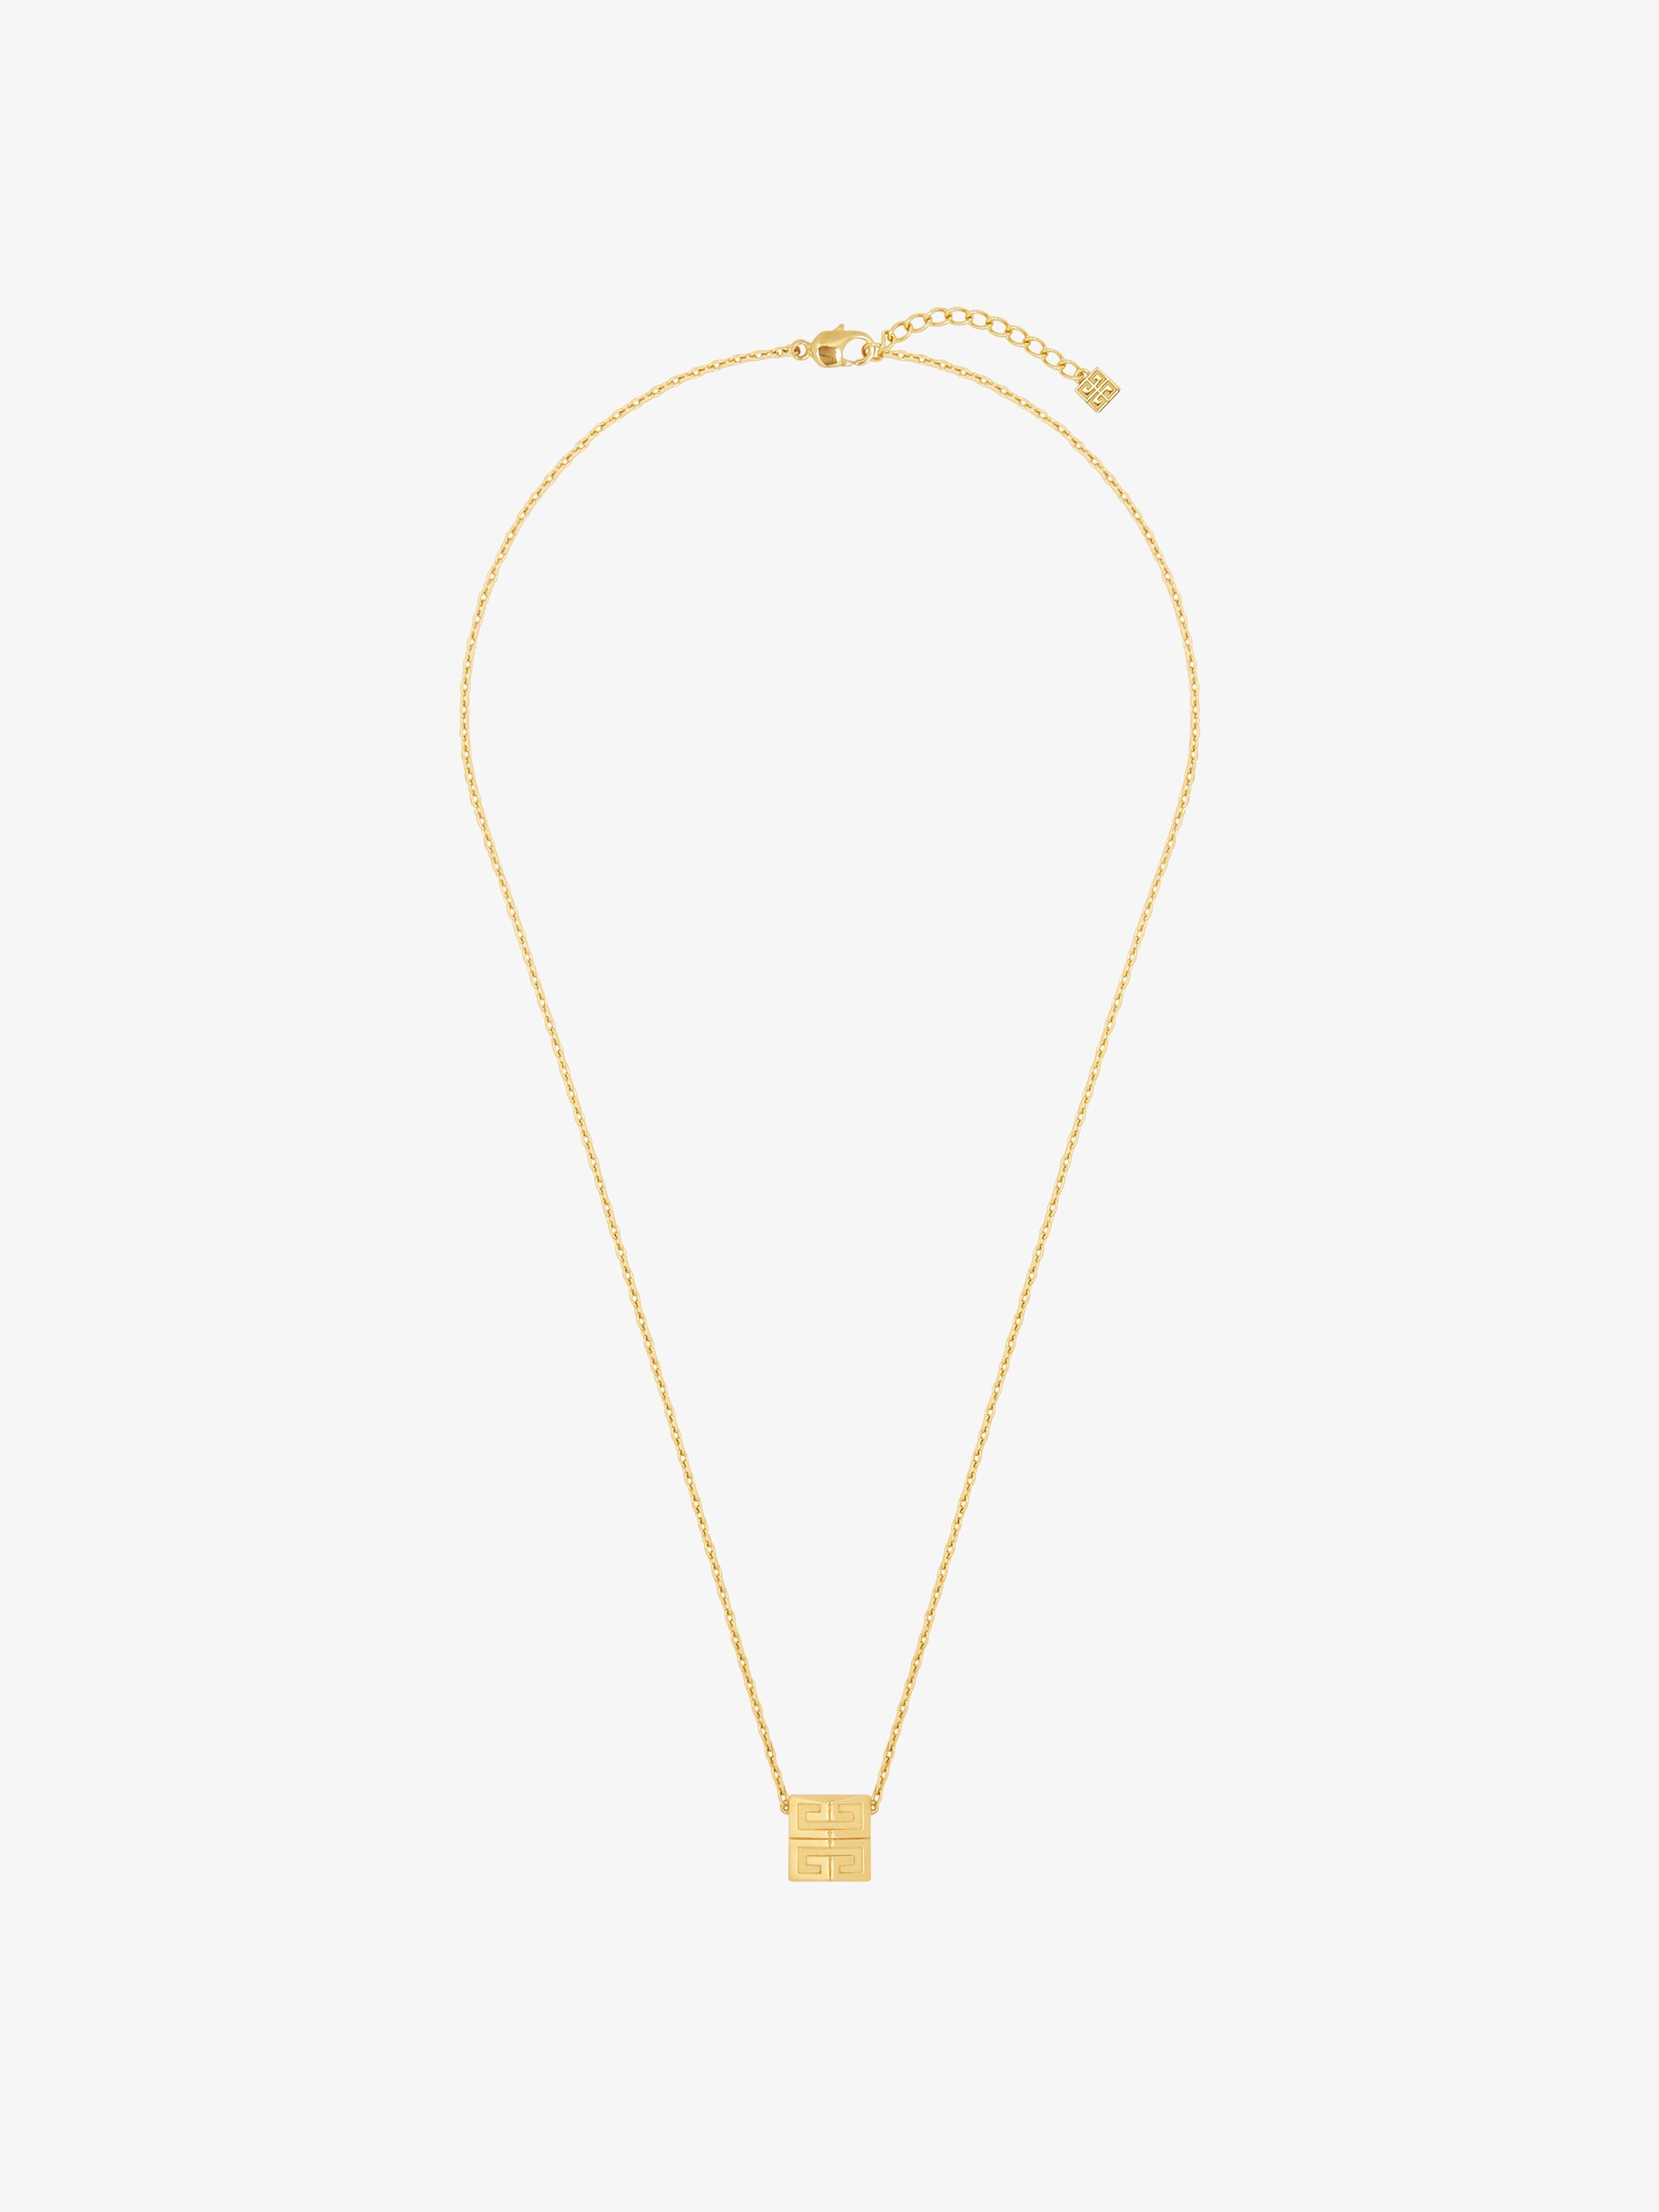 Givenchy Women's 4g Necklace In Metal In Golden Yellow